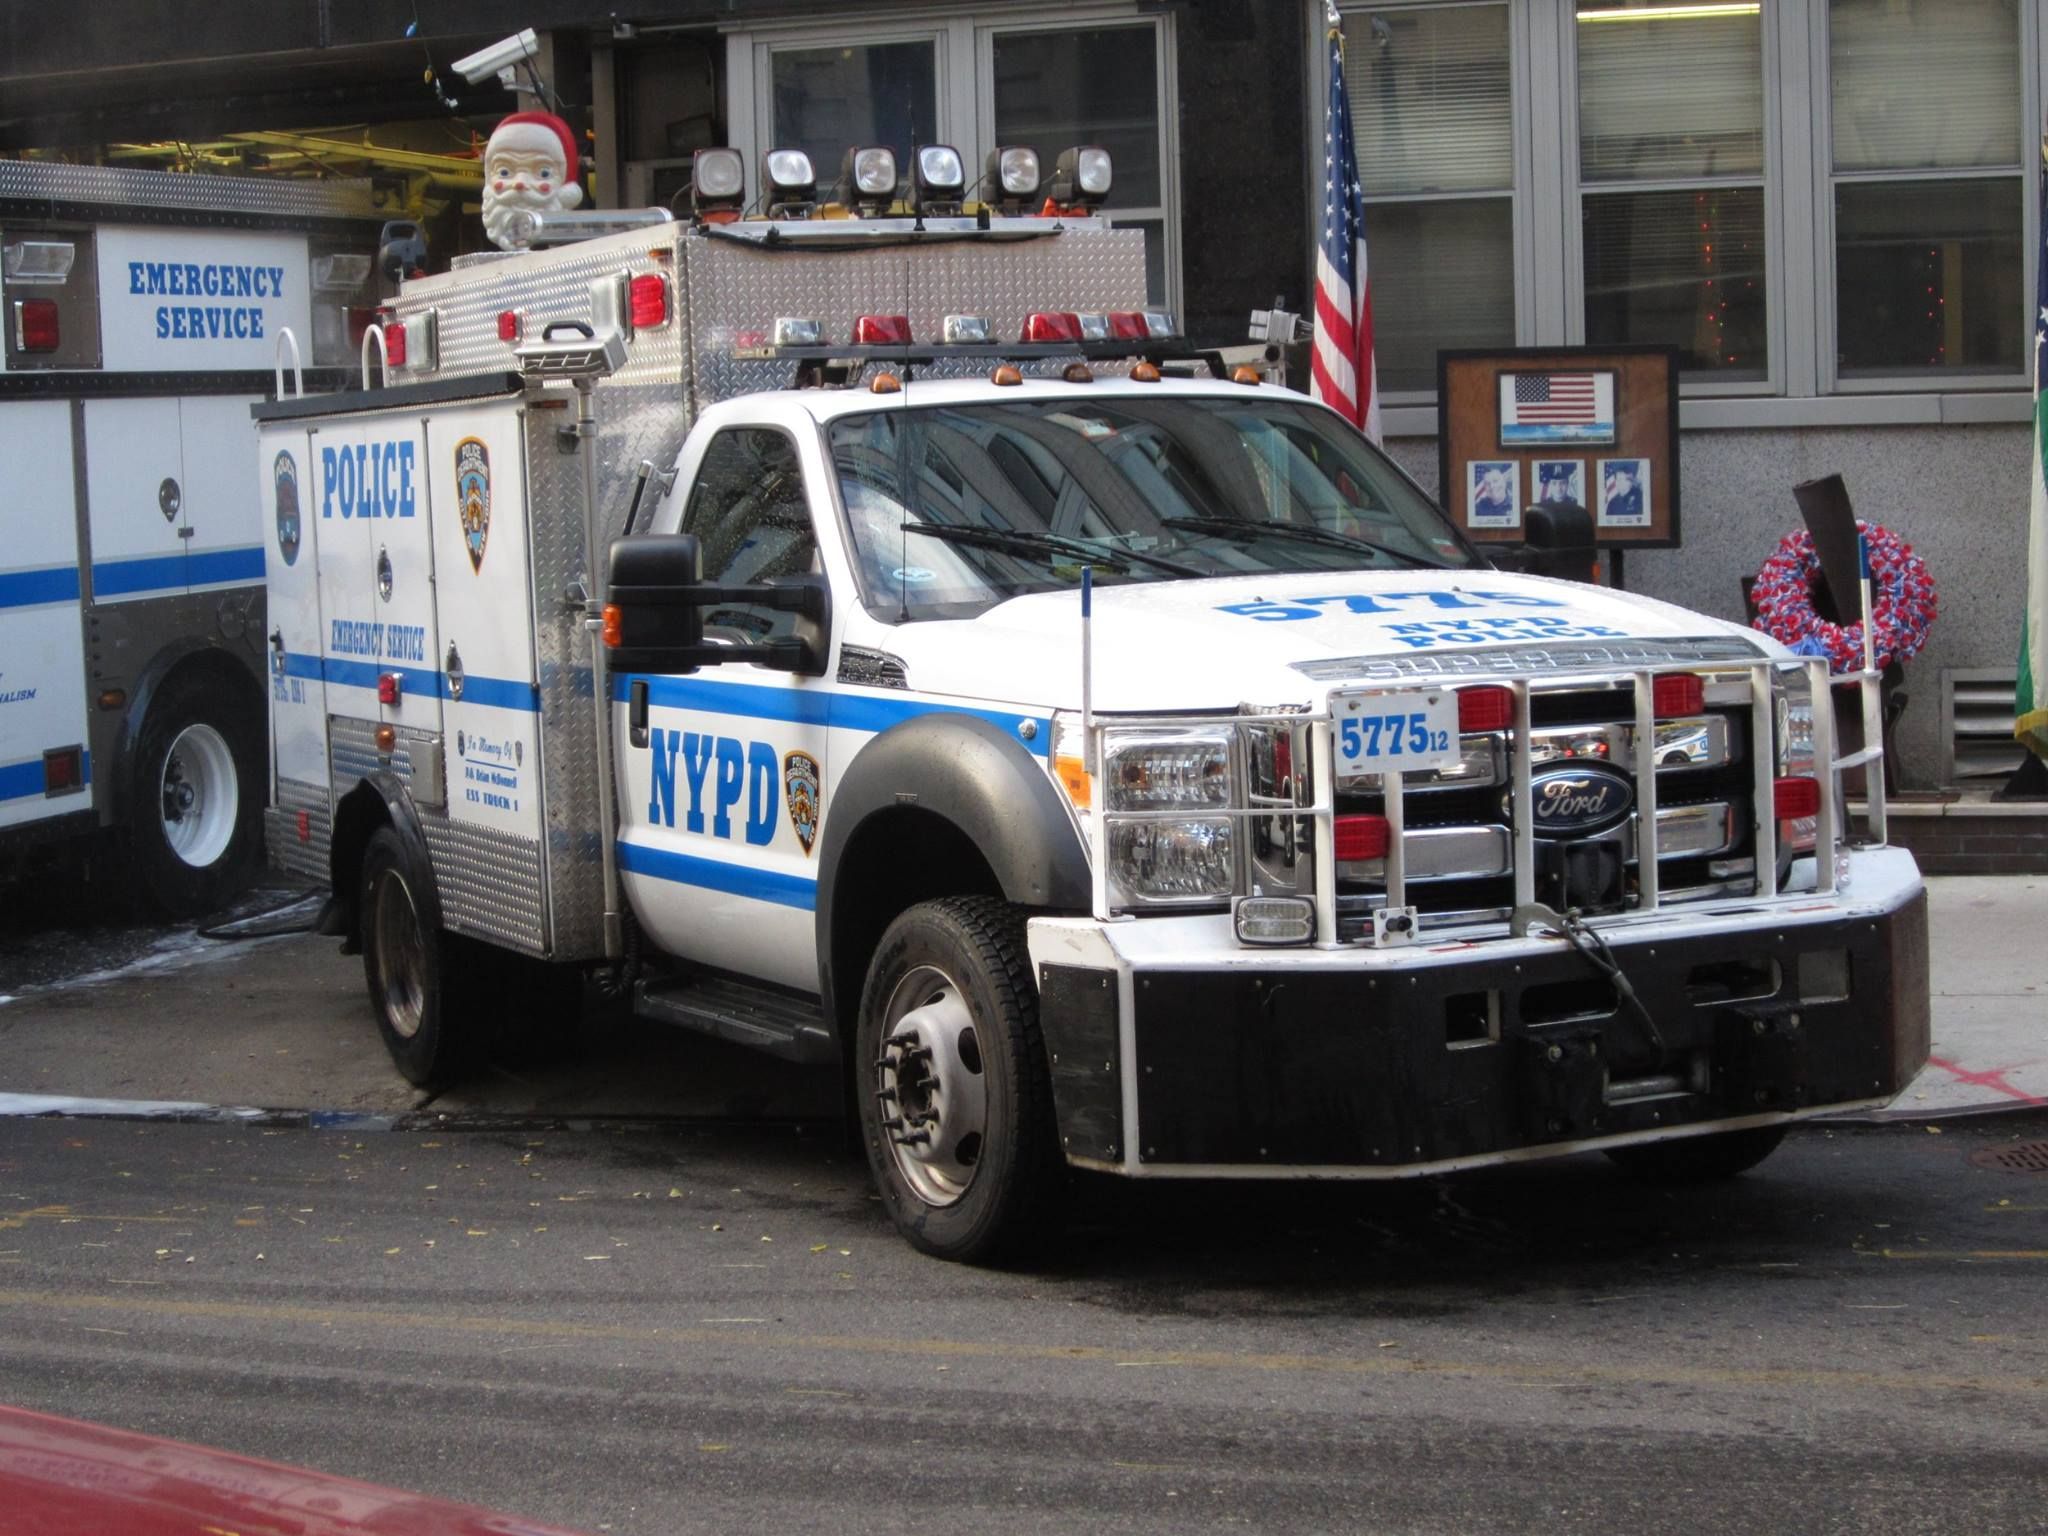 NYPD ESU Ford F550 [2048 x 1536] Want an iPad Air/ Air 2/ Air Pro Follow iPad Air Wallpaper To Download board. Emergency service, Nypd, Police cars